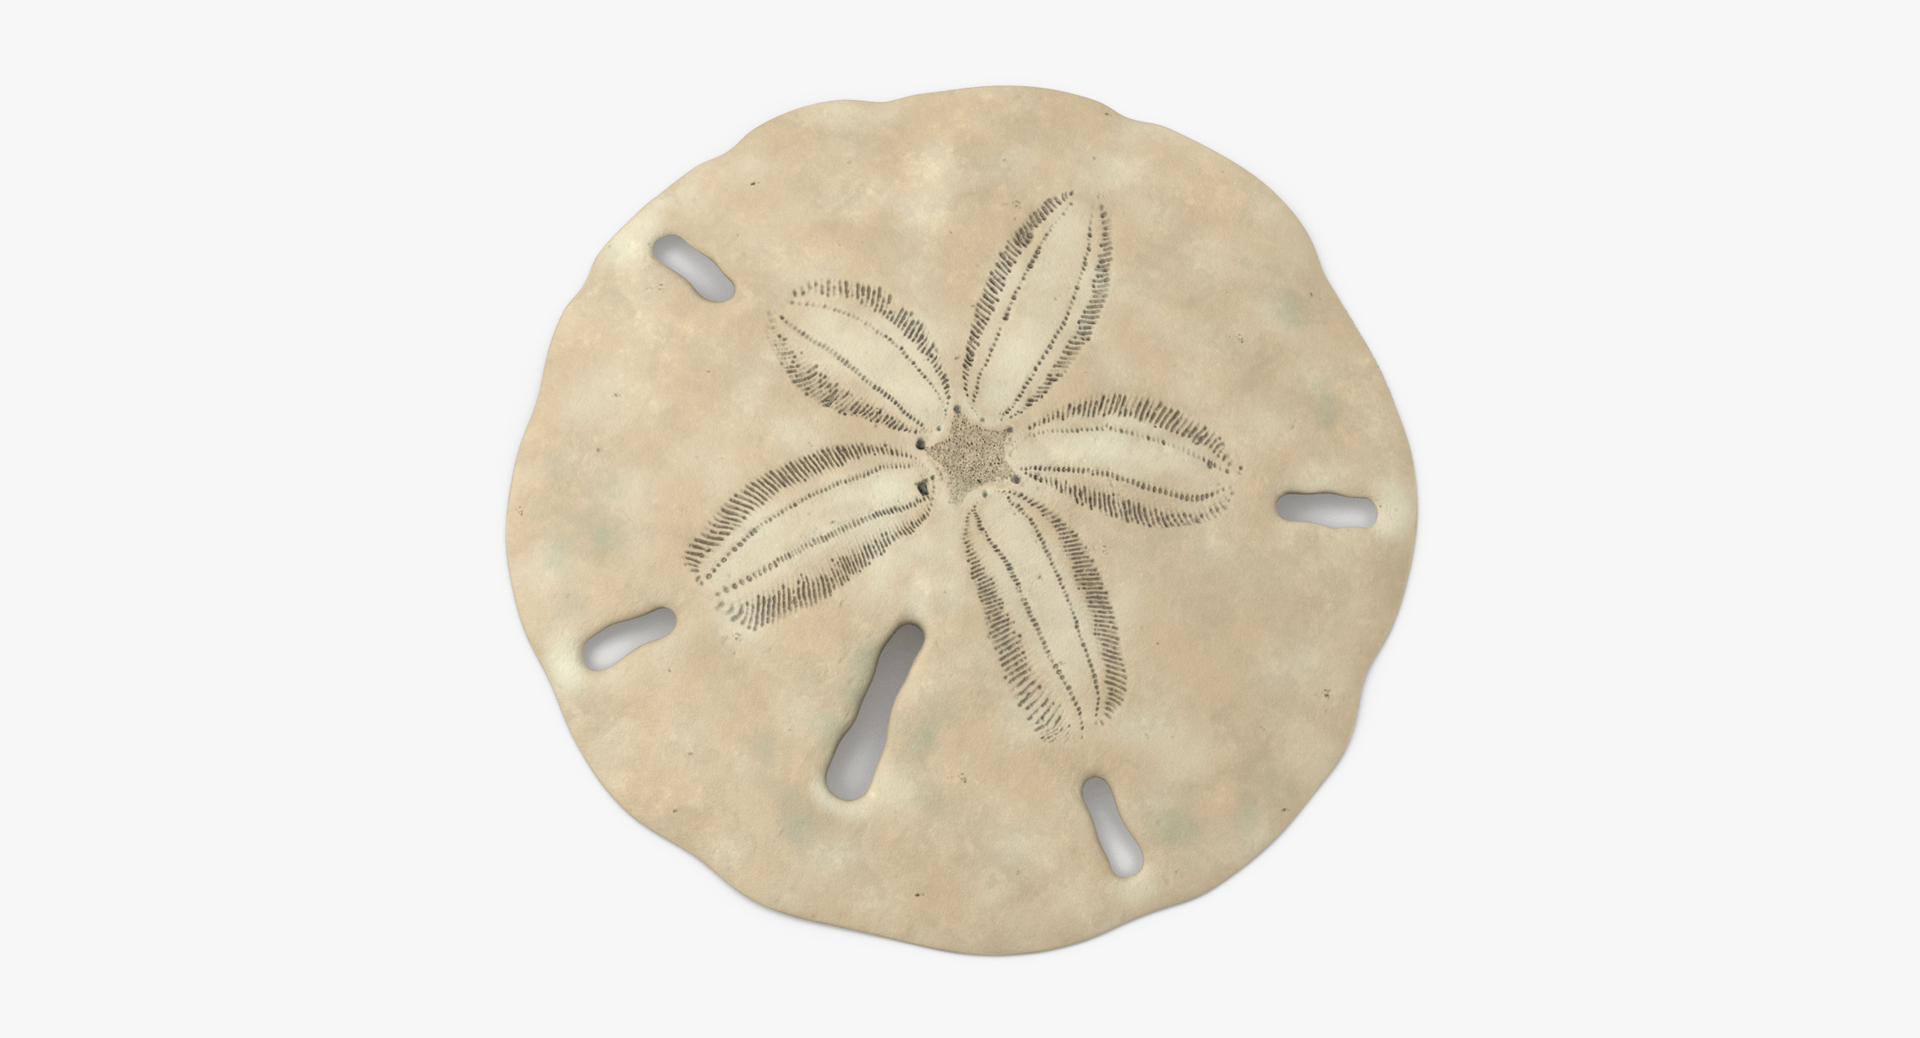 sand dollar png